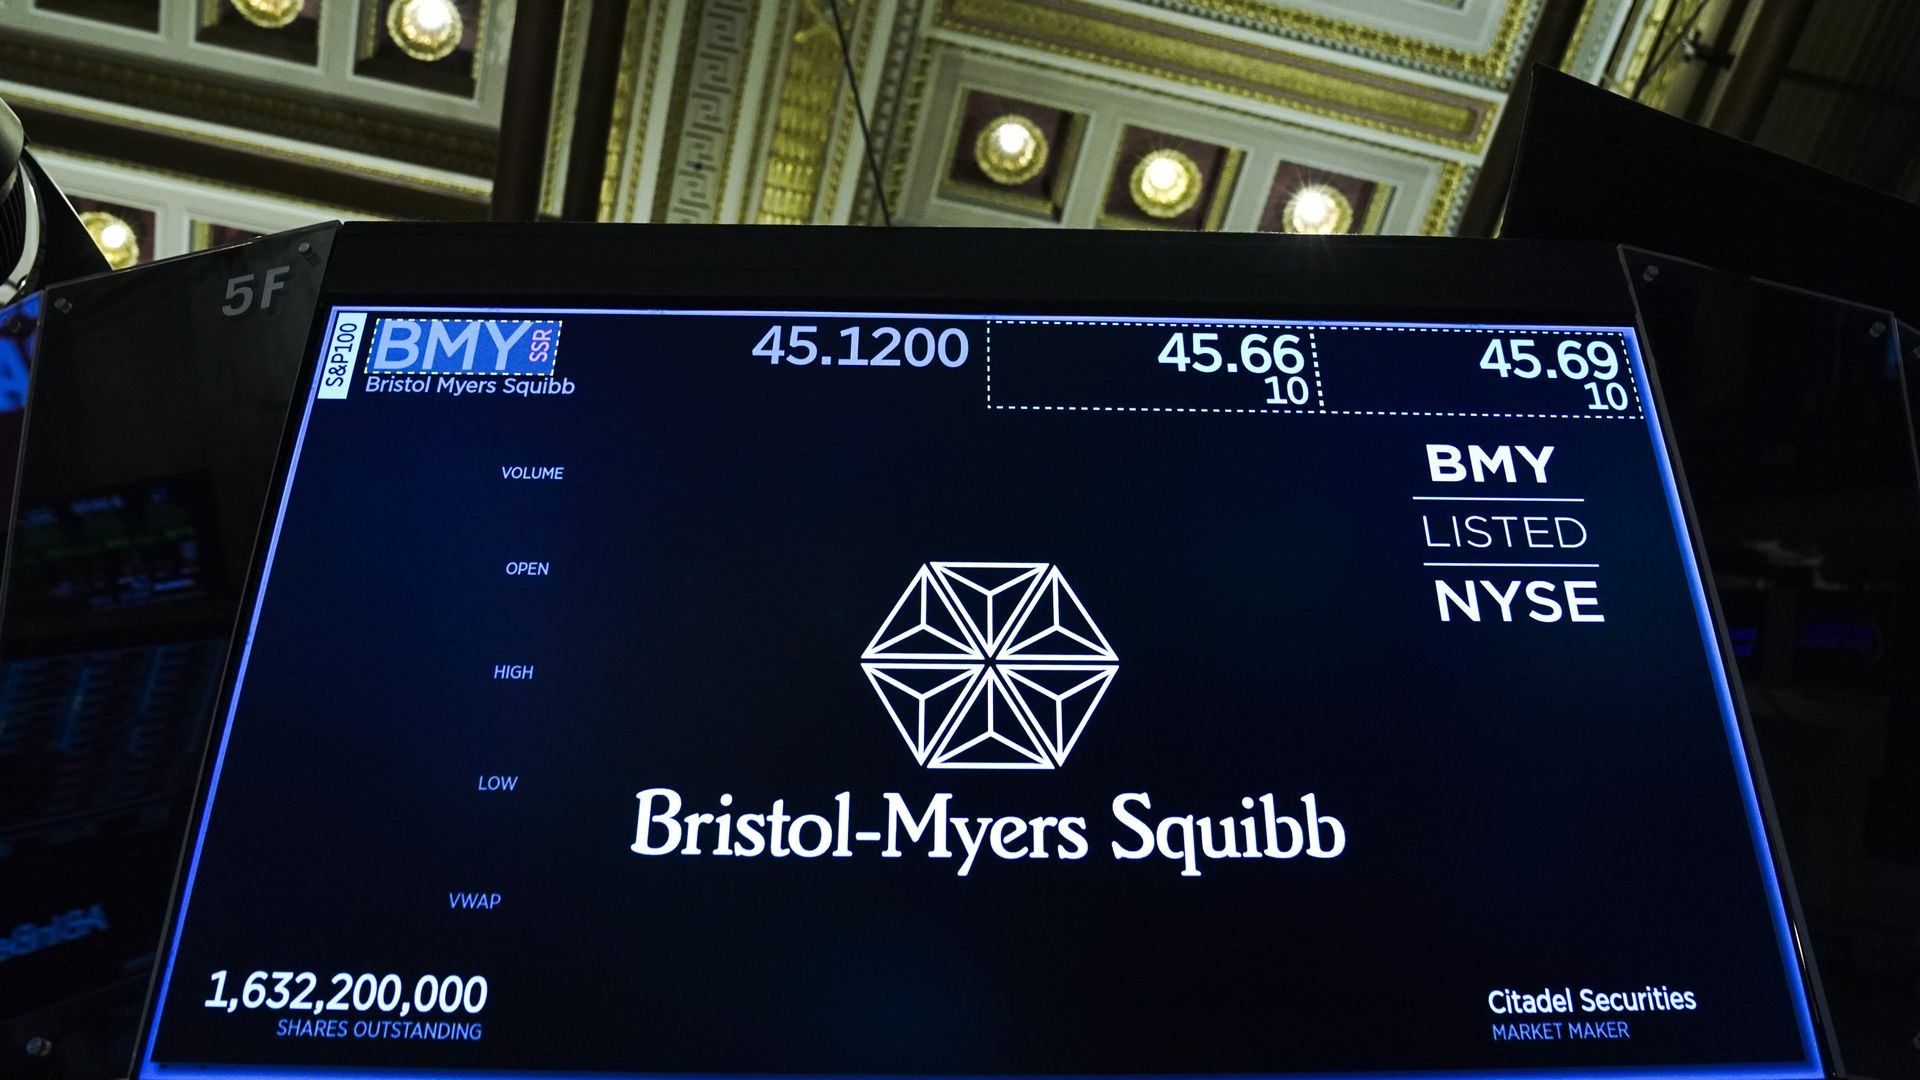 The Bristol-Myers Squibb logo on a computer screen in Wall Street